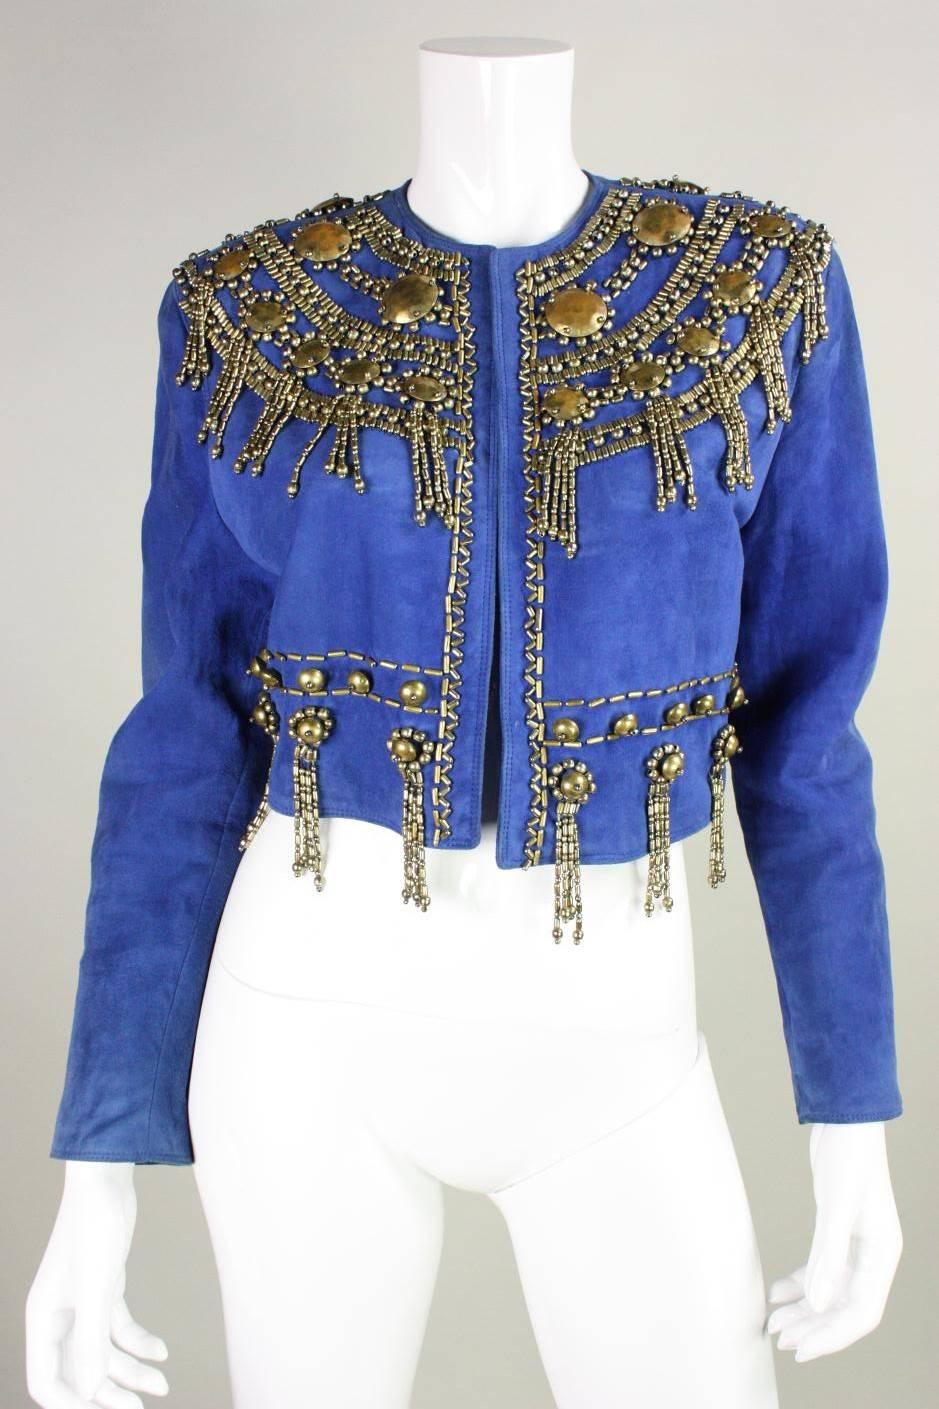 Gorgeous jacket from Gianni Versace dates to the early 1990's and is made of royal blue suede.  It features brass-toned ornamentation in various sizes and shapes arranged in a concentric pattern around the neck and around the waist.  No closures. 